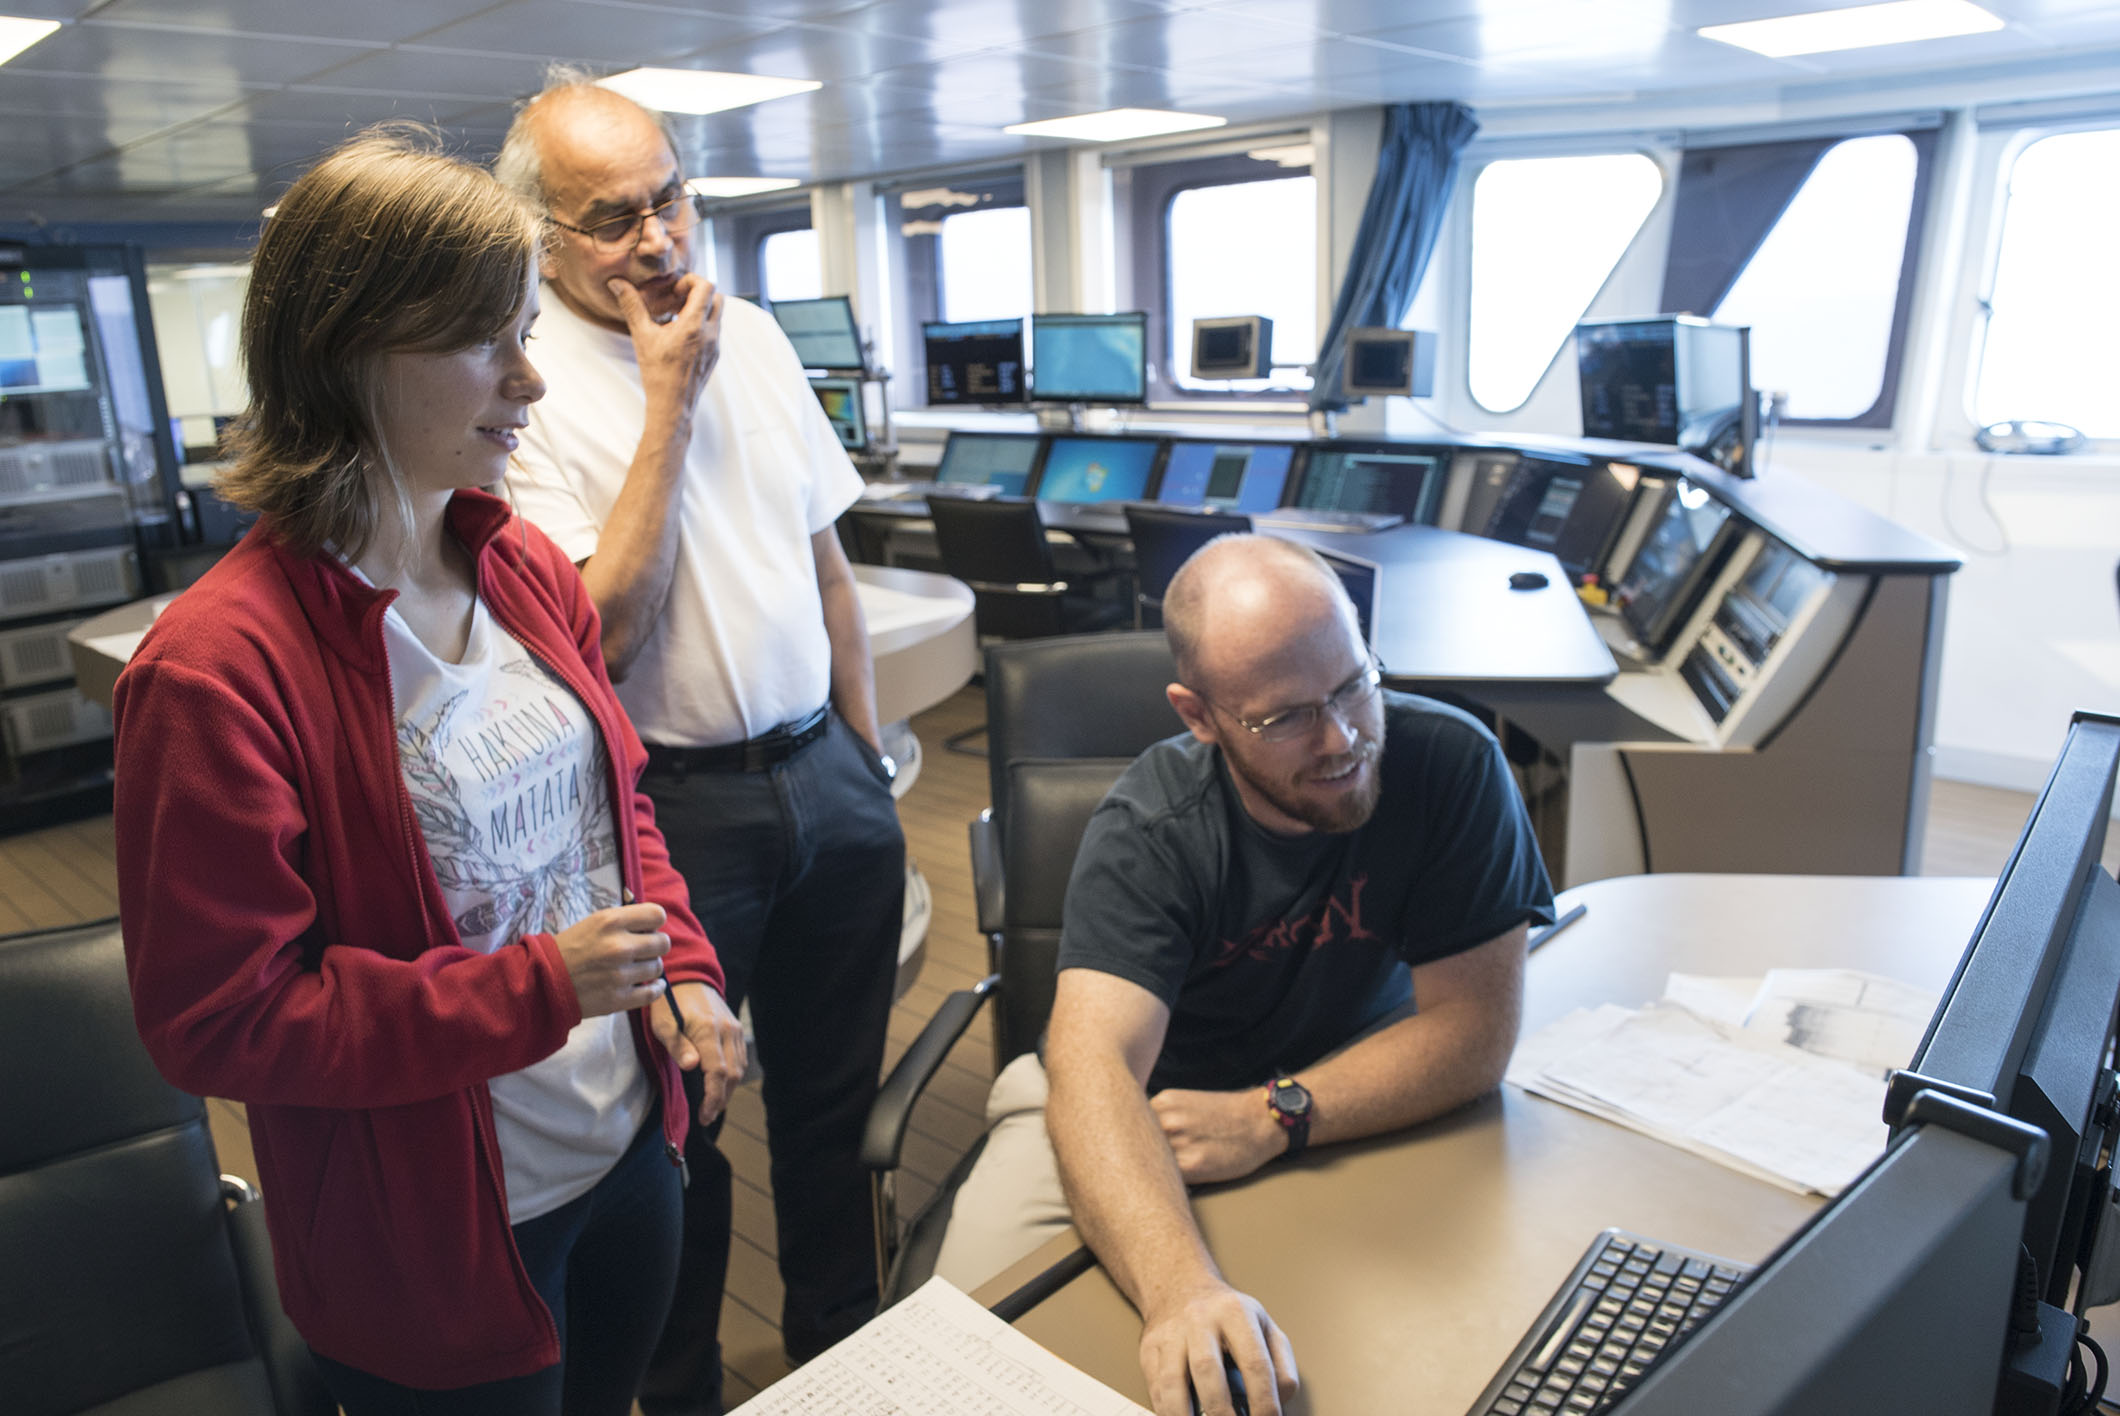 Marie-Laure Fournasson, Chief Scientists Satish Singh and Dr Kyle Bradley discuss possible stories to explain the geological features found during the survey (Source: EOS/Monika Naranjo Gonzales)